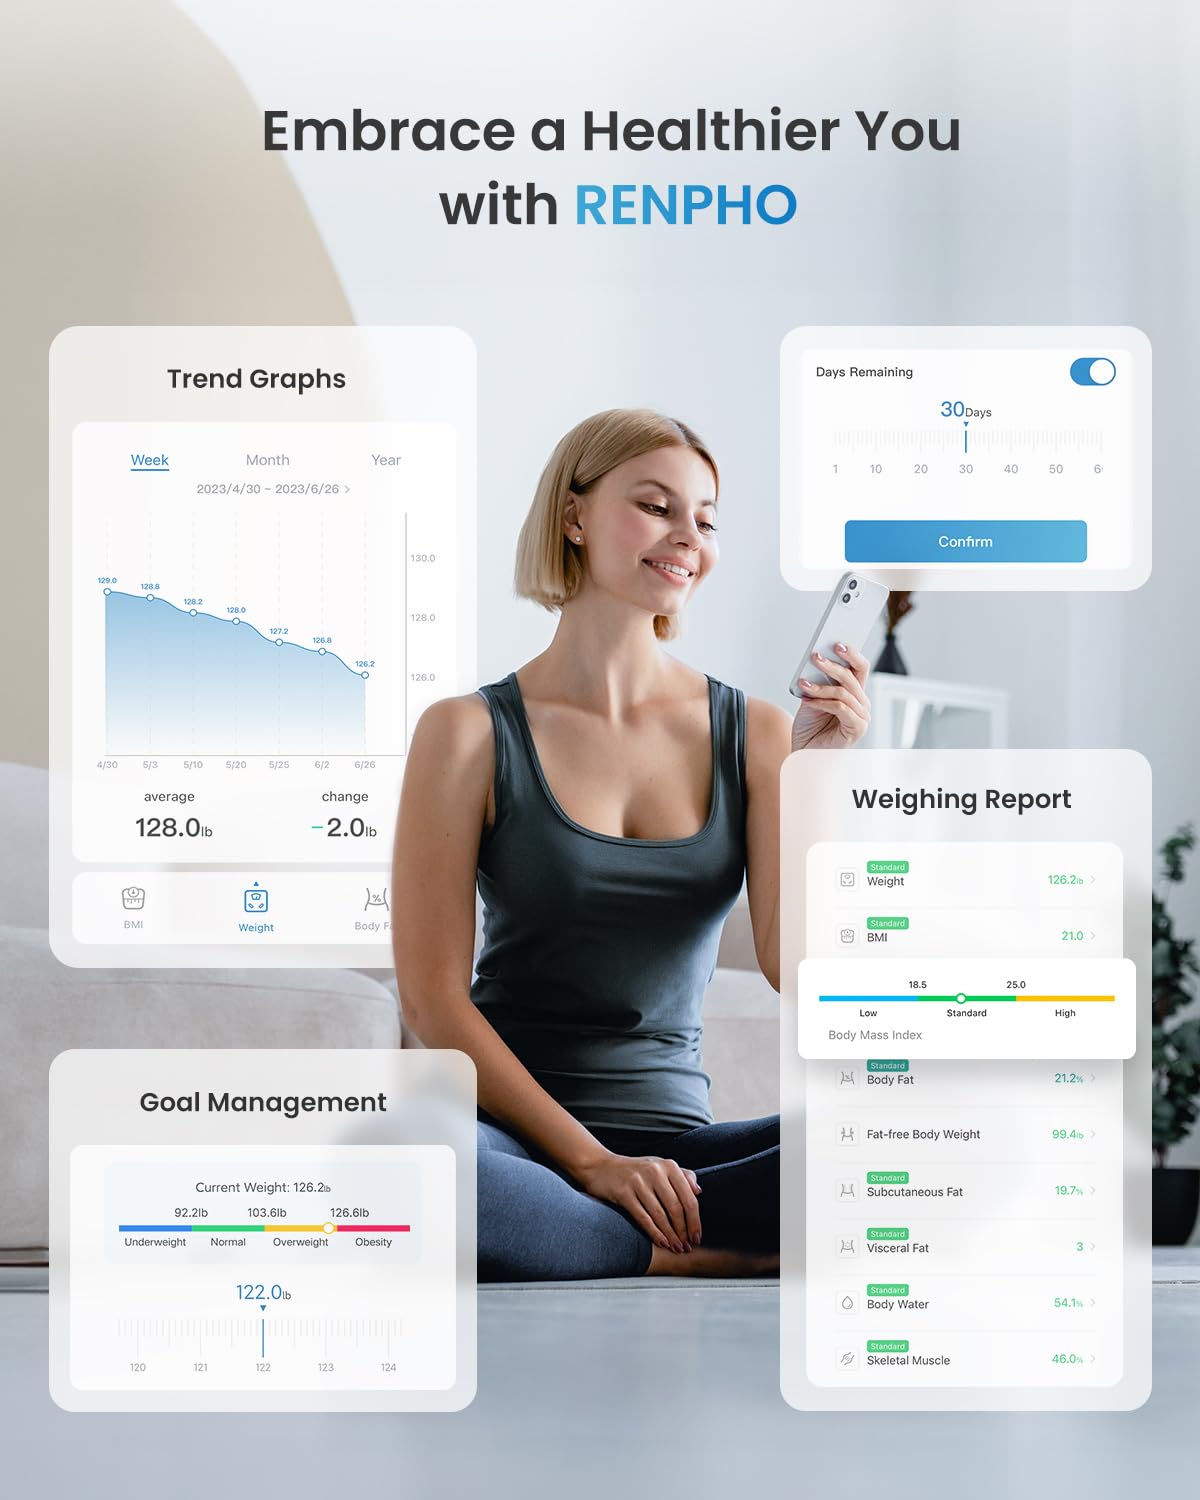 A woman sitting on a couch uses the Renpho Elis 1 Smart Body Scale on her phone, displayed alongside visuals of various health metrics like BMI, body composition analysis, and goal management in a clean, informative layout.